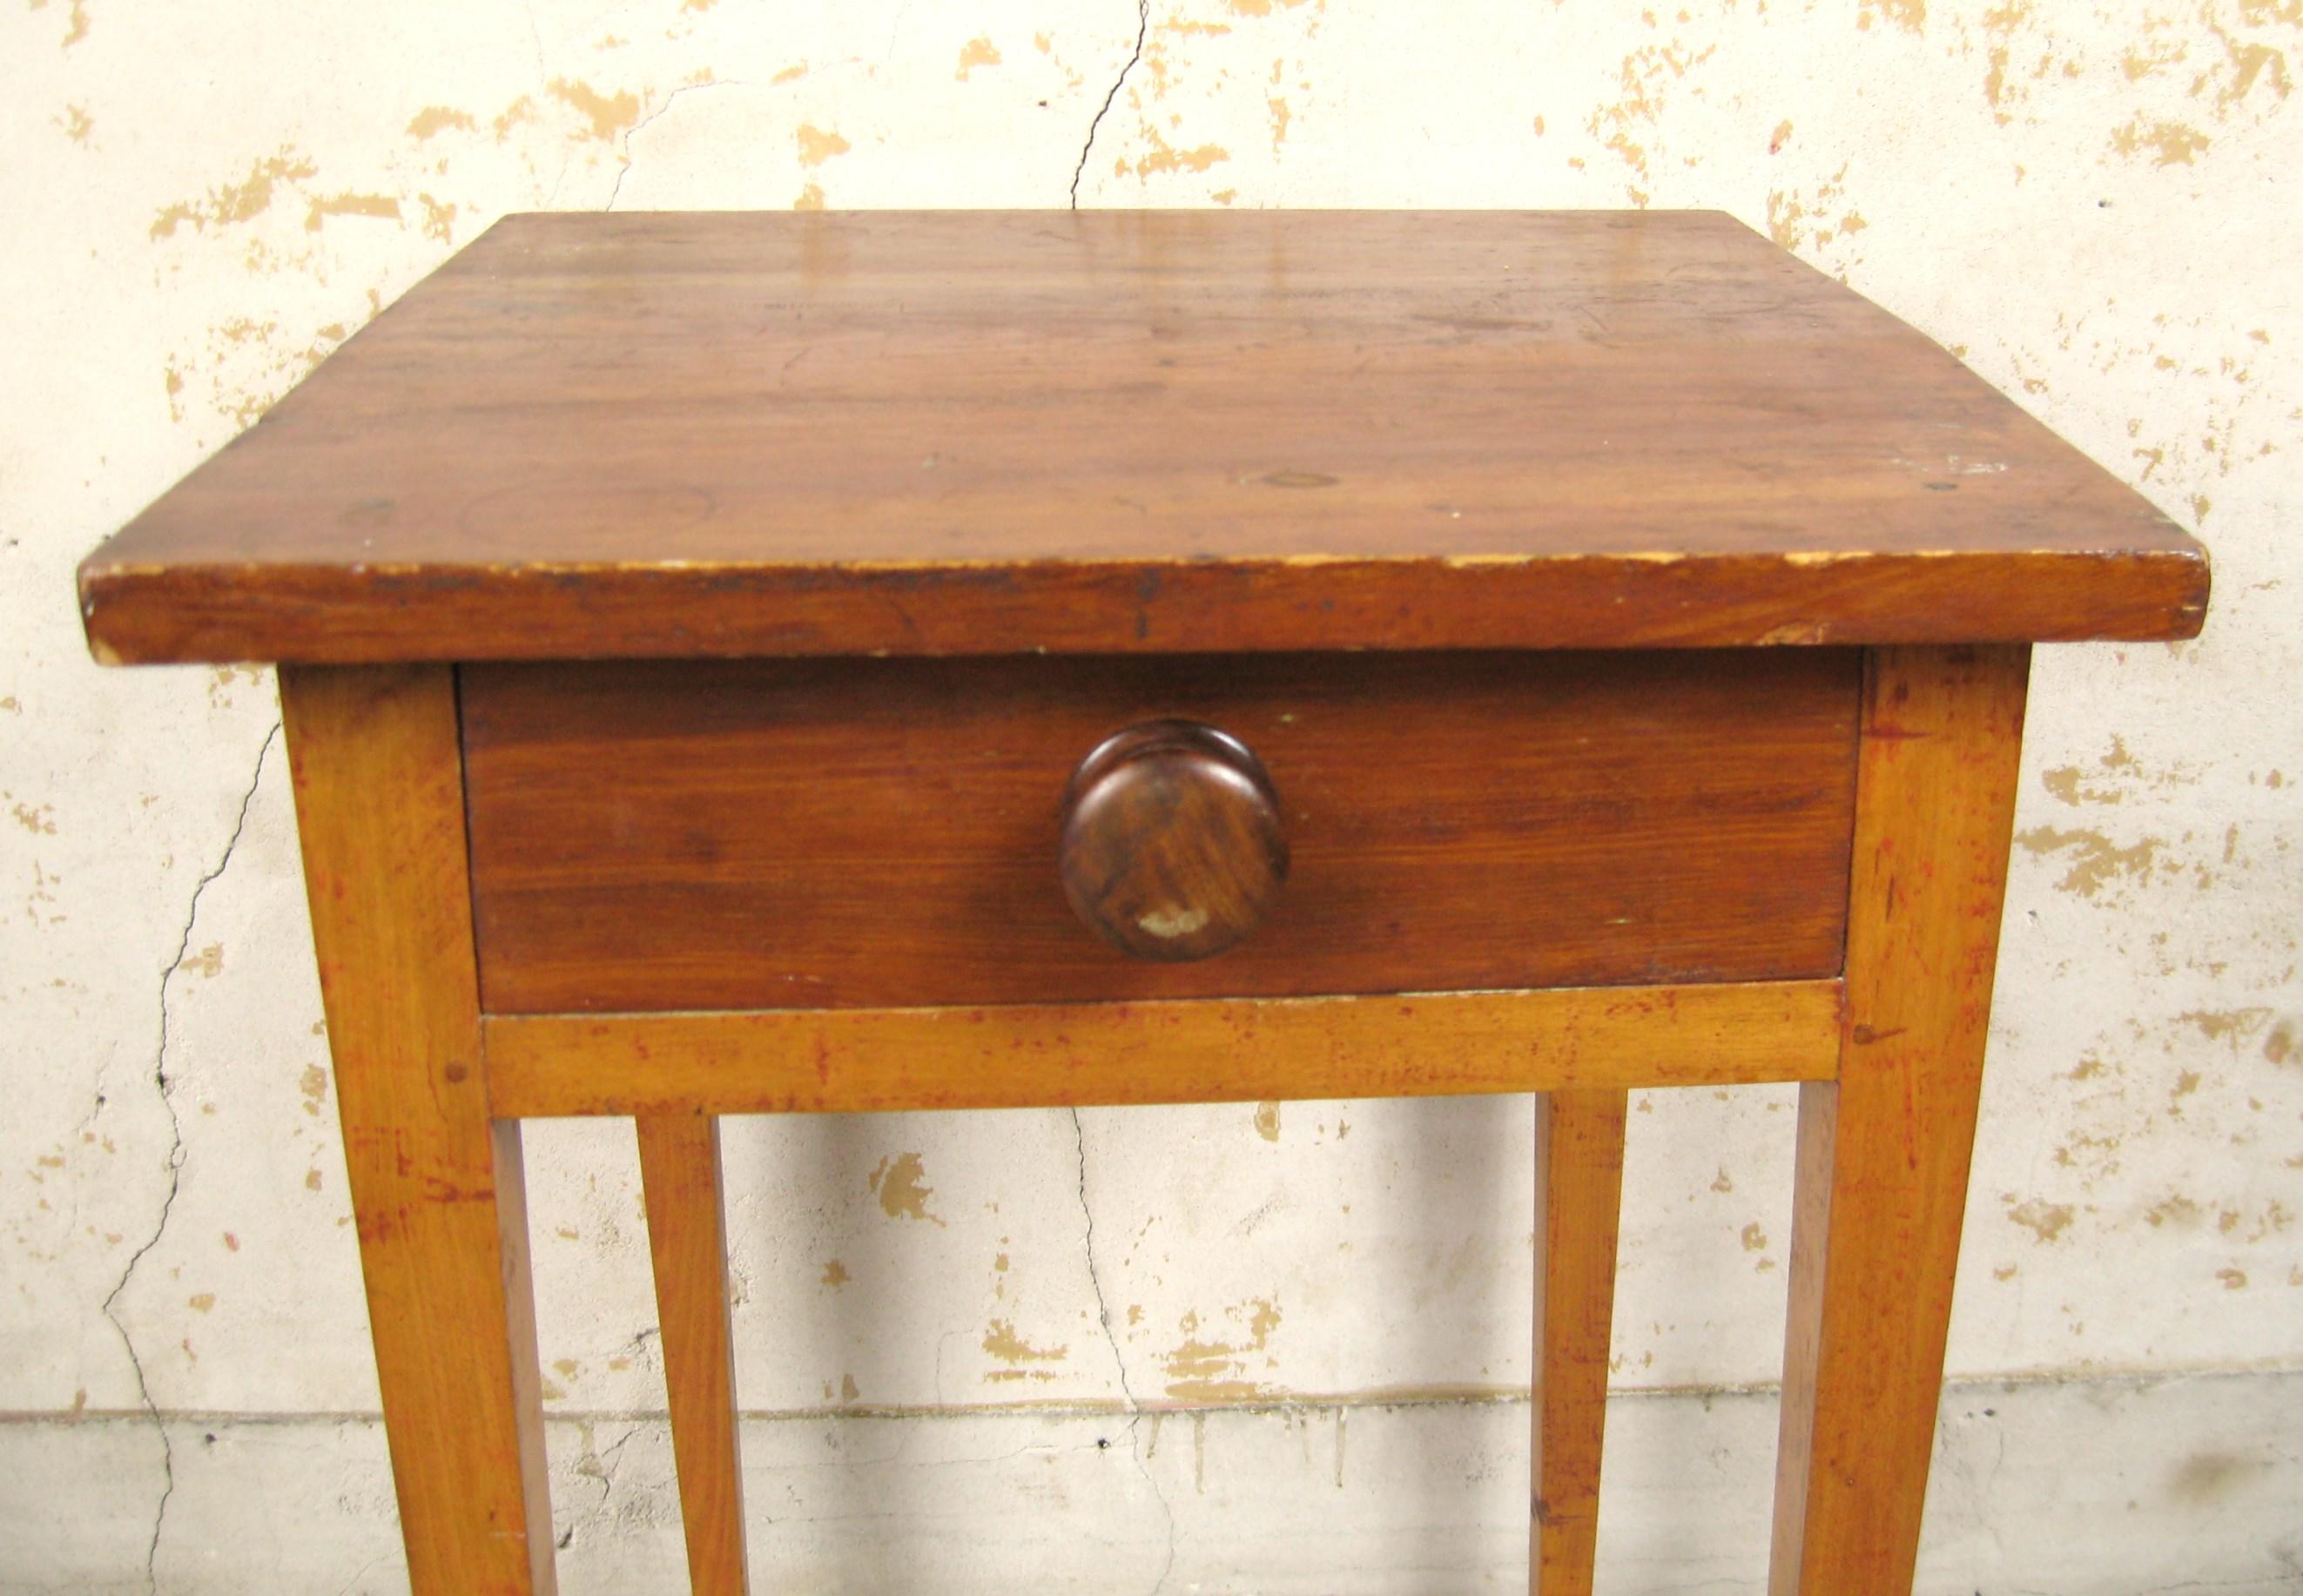 Antique Primitive Farm work 1 Draw table with Tapered Leg is a rare find for collectors and enthusiasts of historical furniture. Its great natural color, country-style theme, and wood material make it a unique addition to any Farmhouse or home